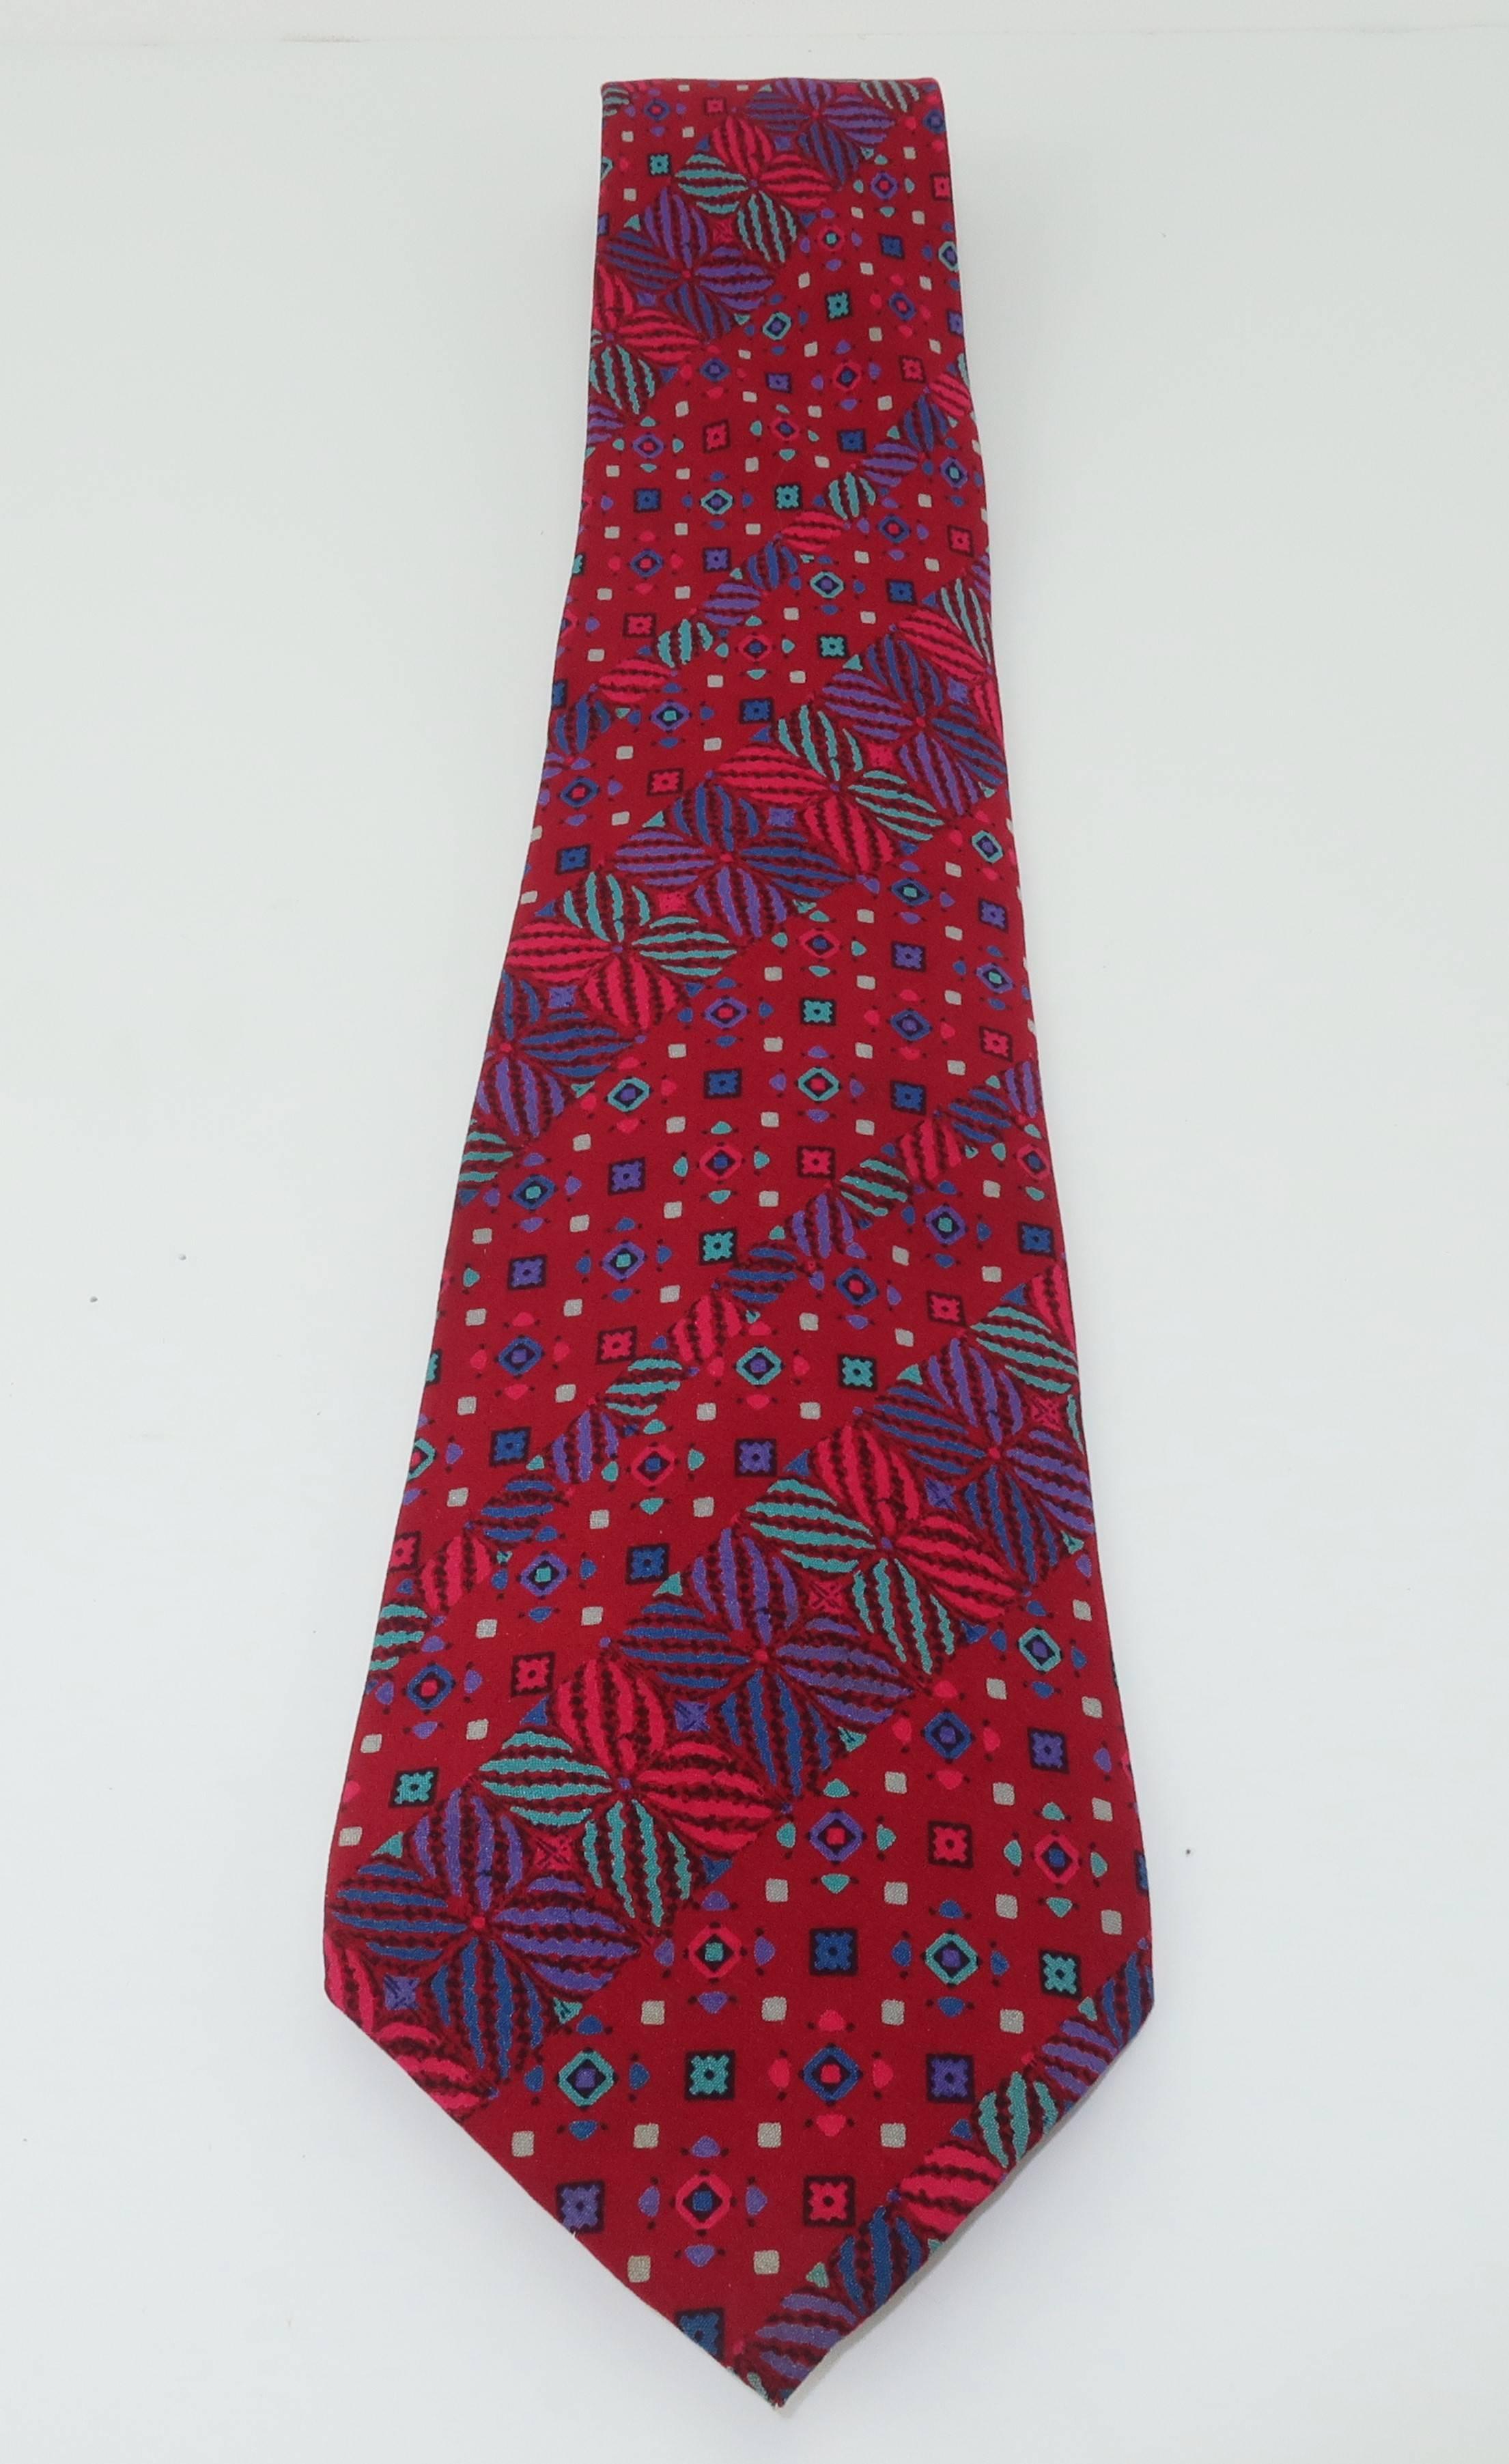 Missoni creates a menswear silk necktie in shades of deep ruby red, teal blues and greens with plum accents.  The geometric design has a playful vibe and it is beautifully made with the quality one would expect from Missoni.  Good condition with a